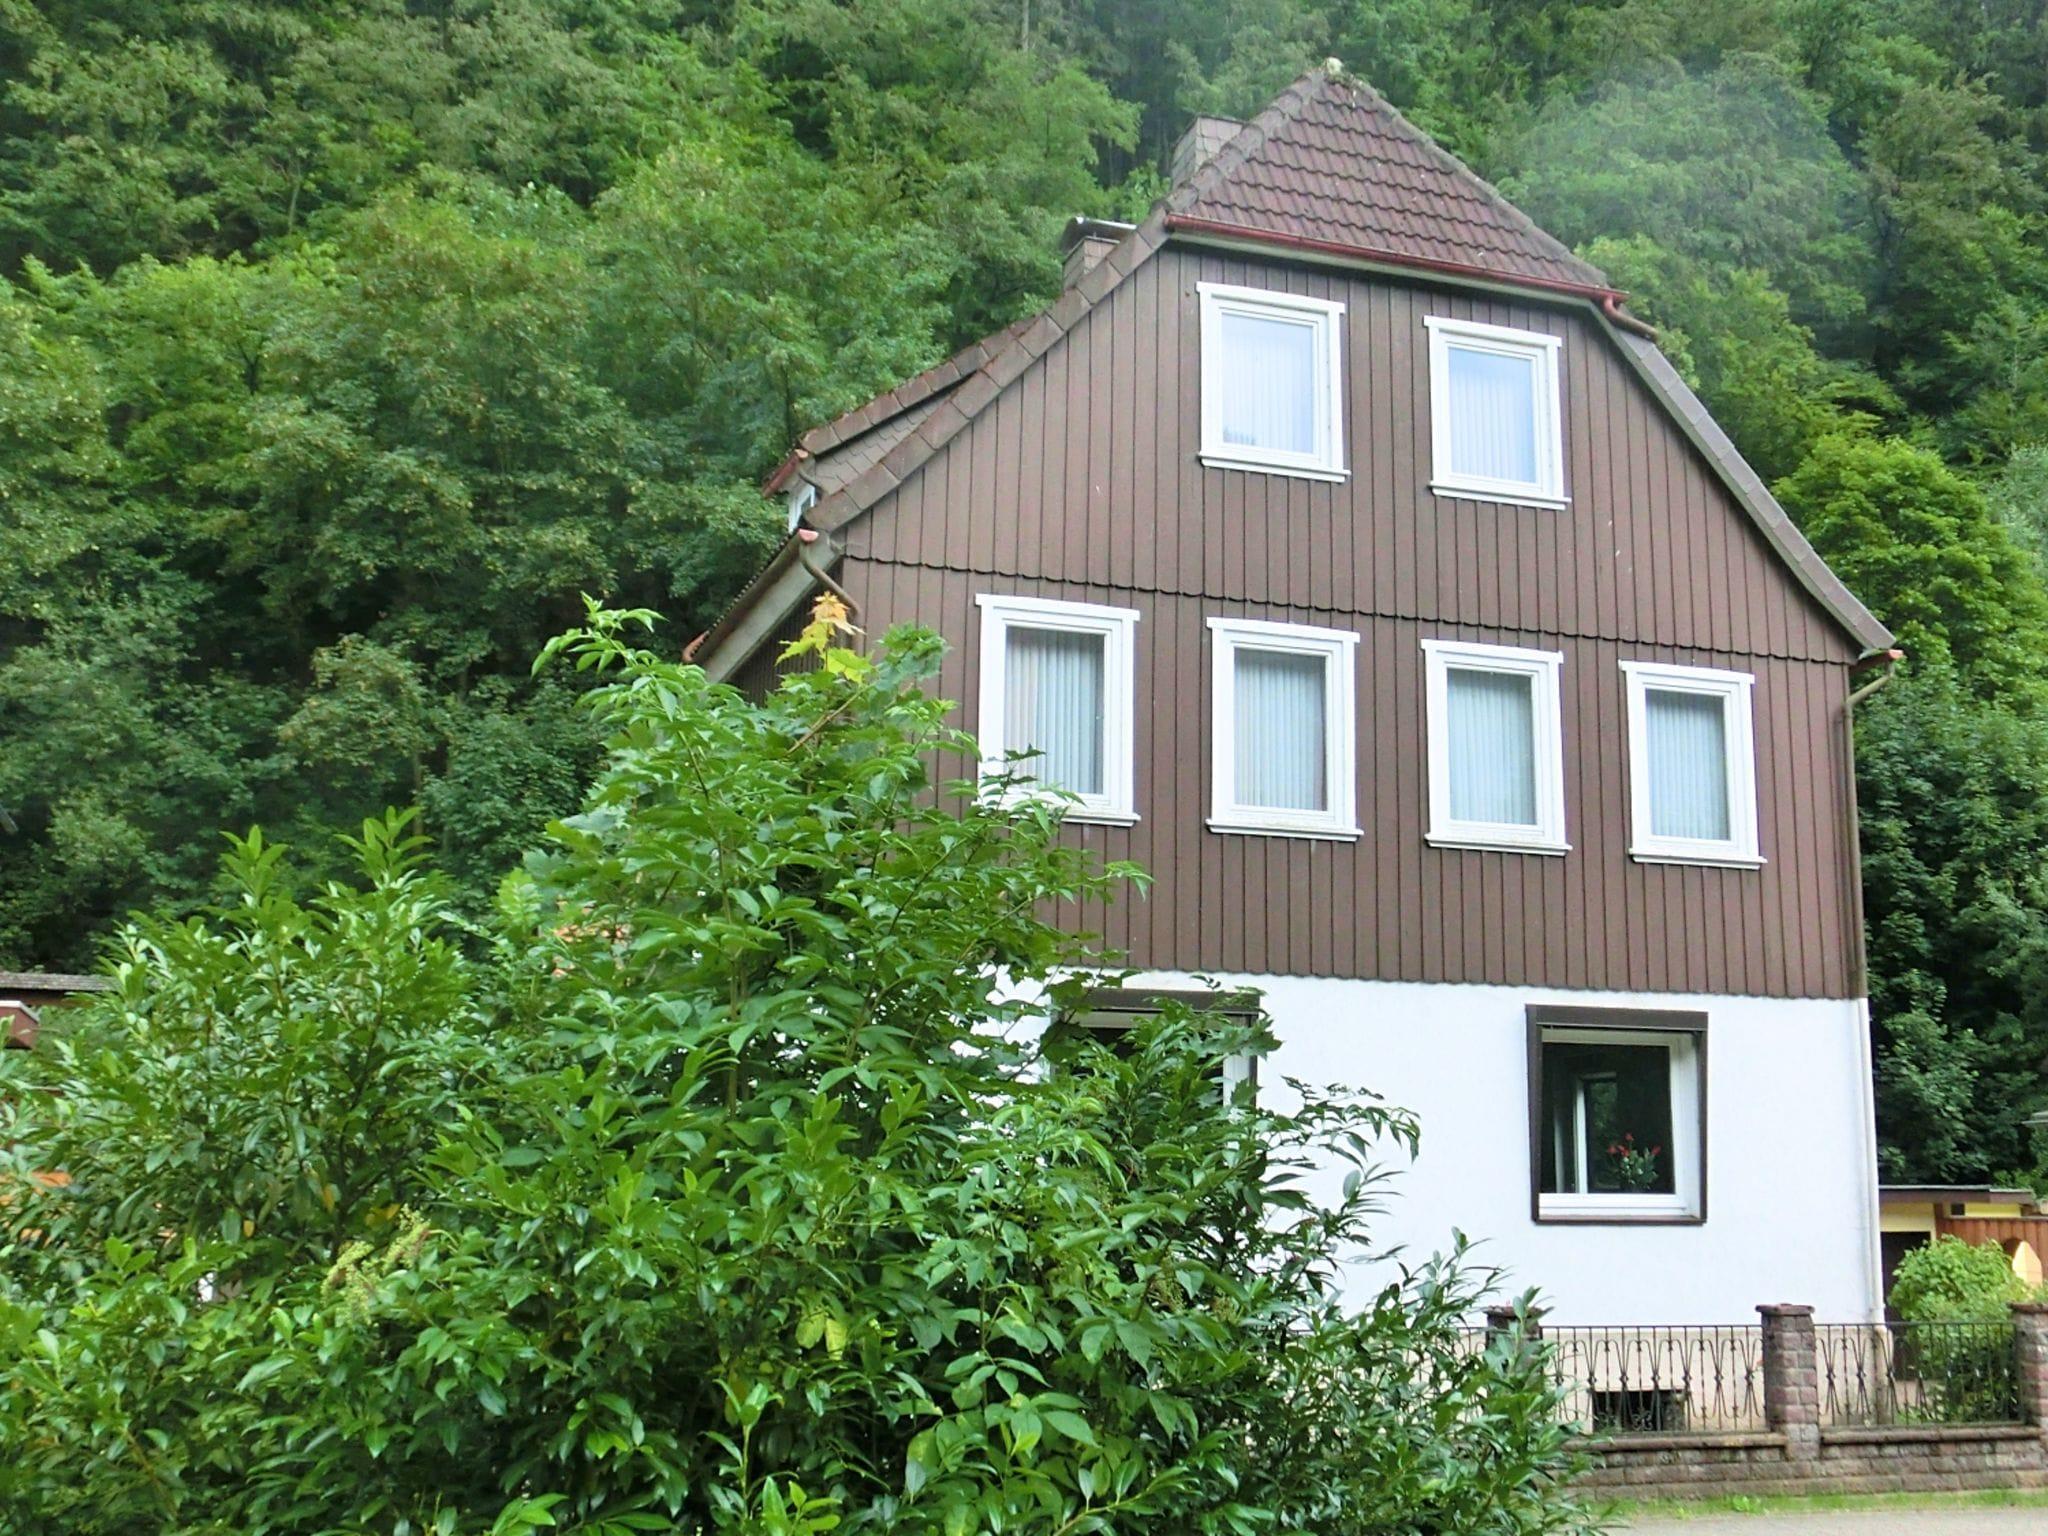 Detached Group House In The Harz Region With A Fenced Garden - Zorge